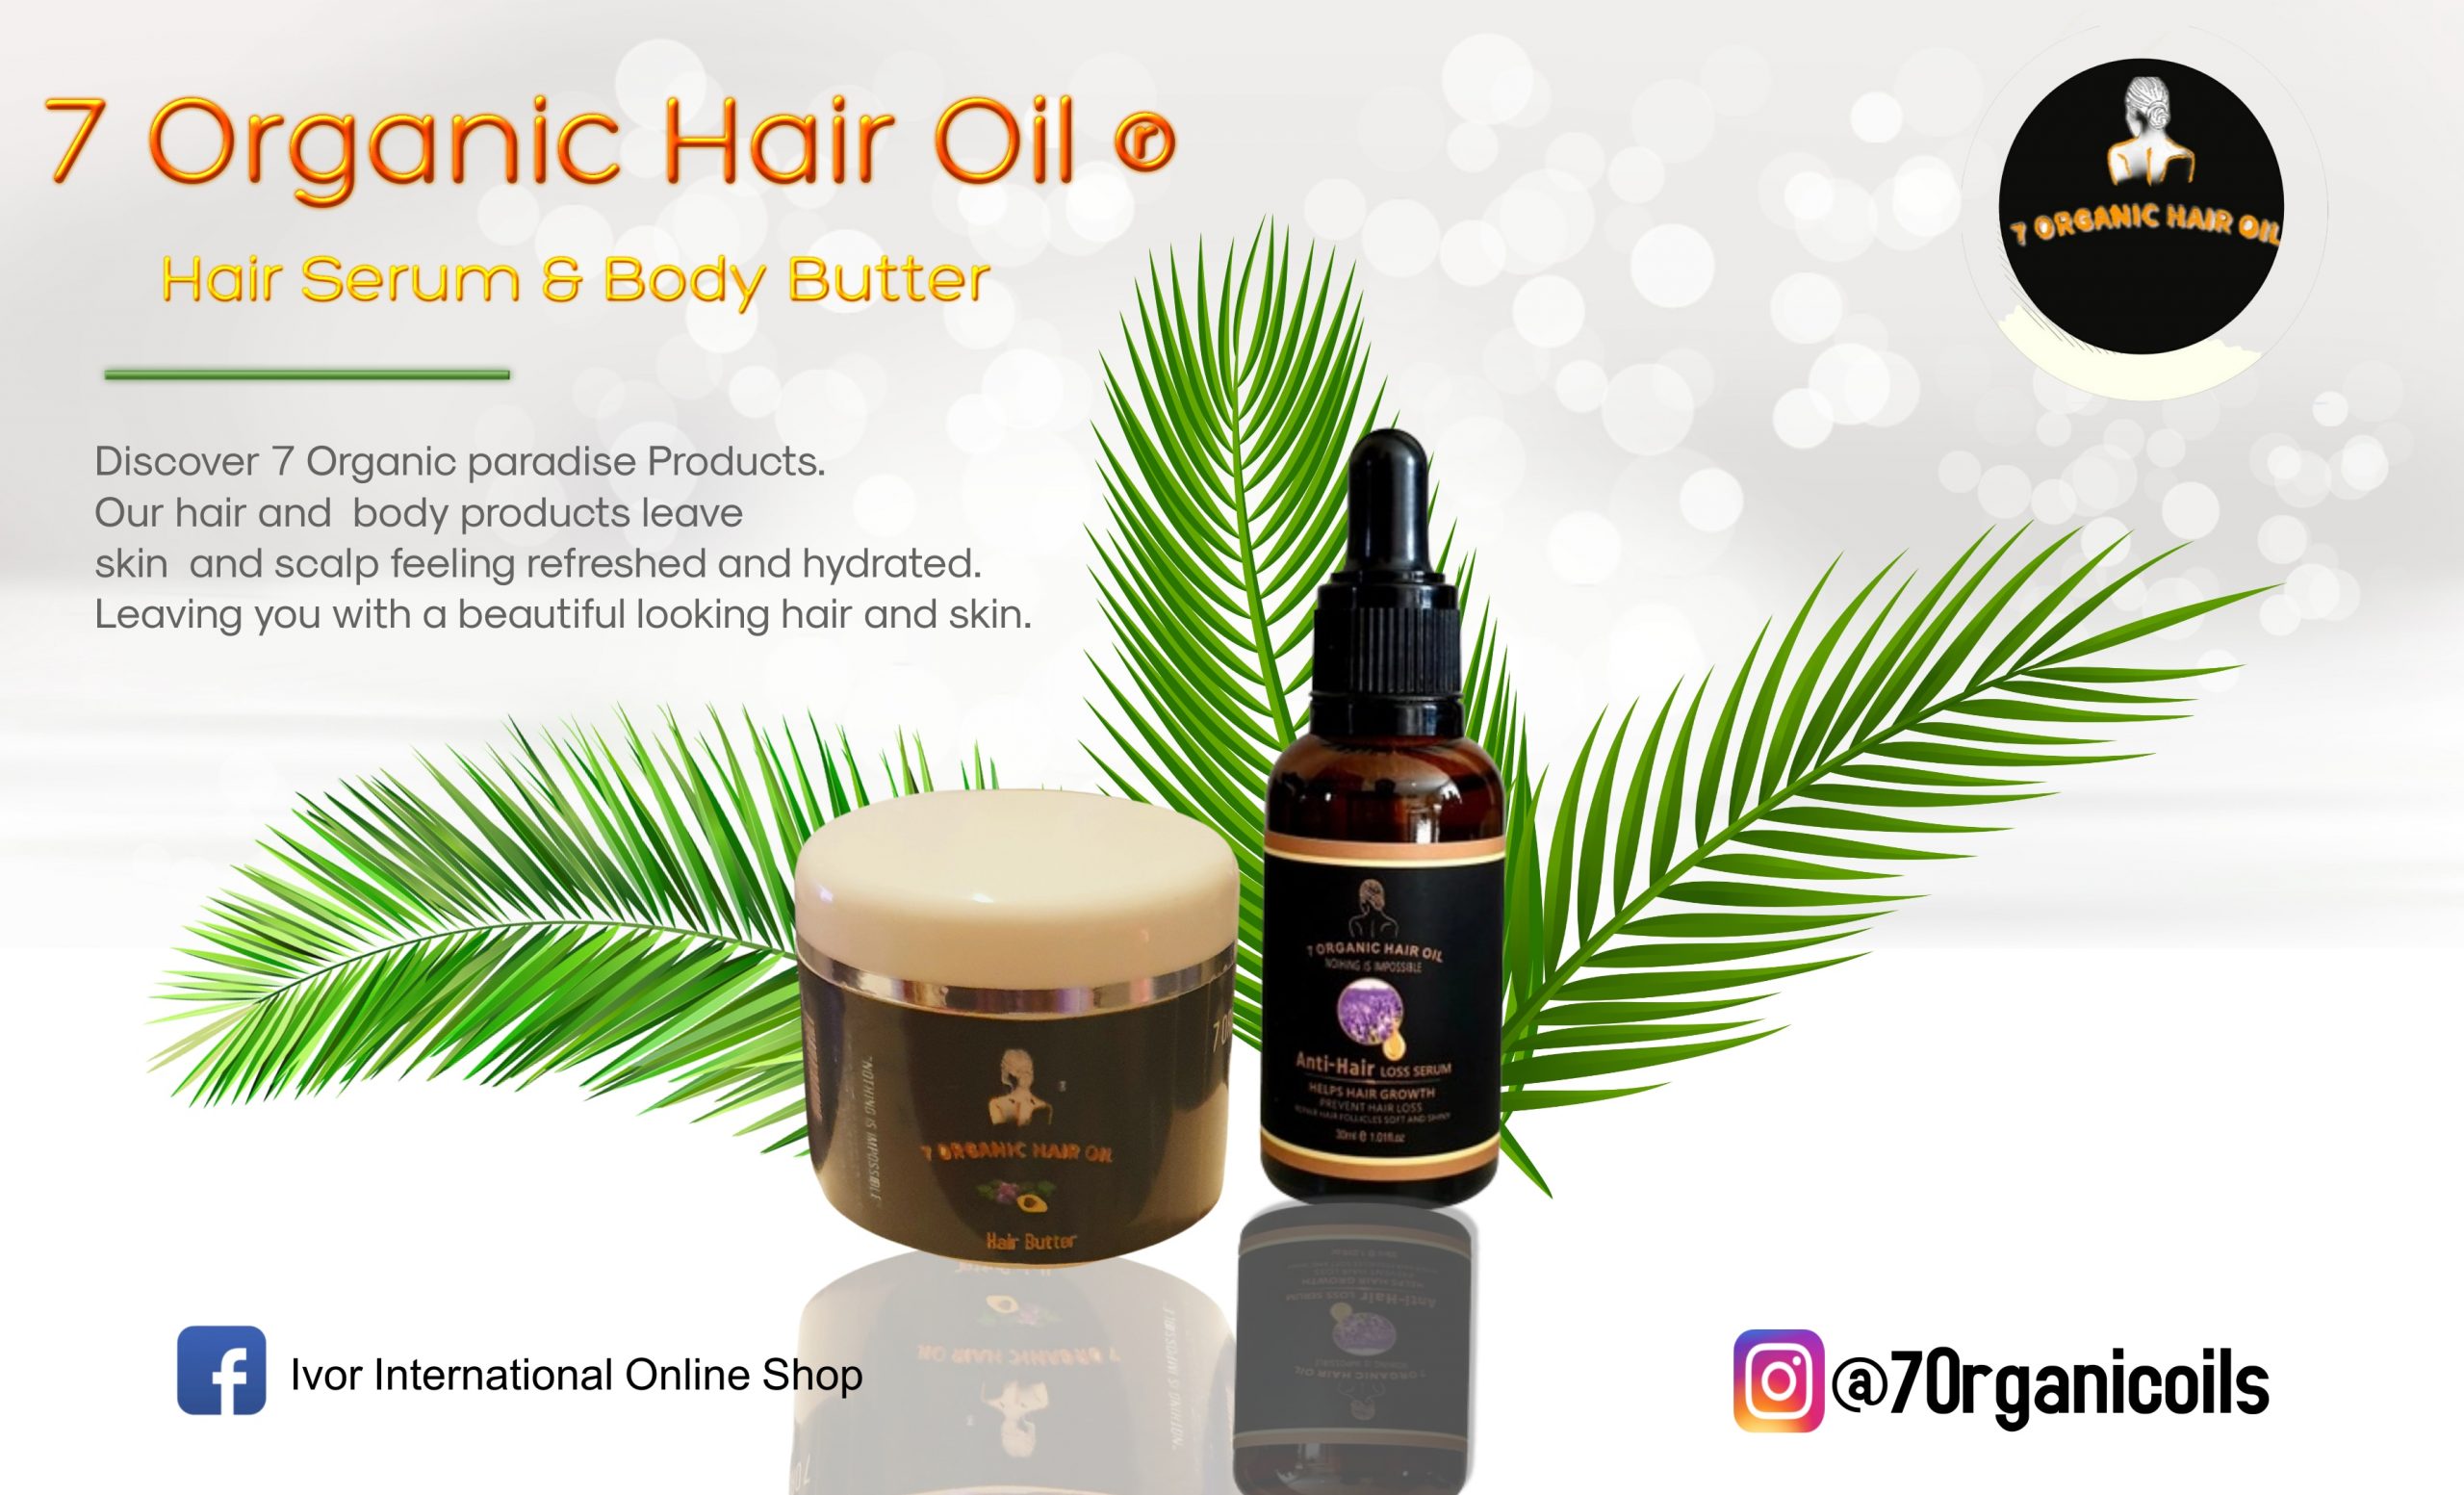 About Us – 7 Organic Hair Oil